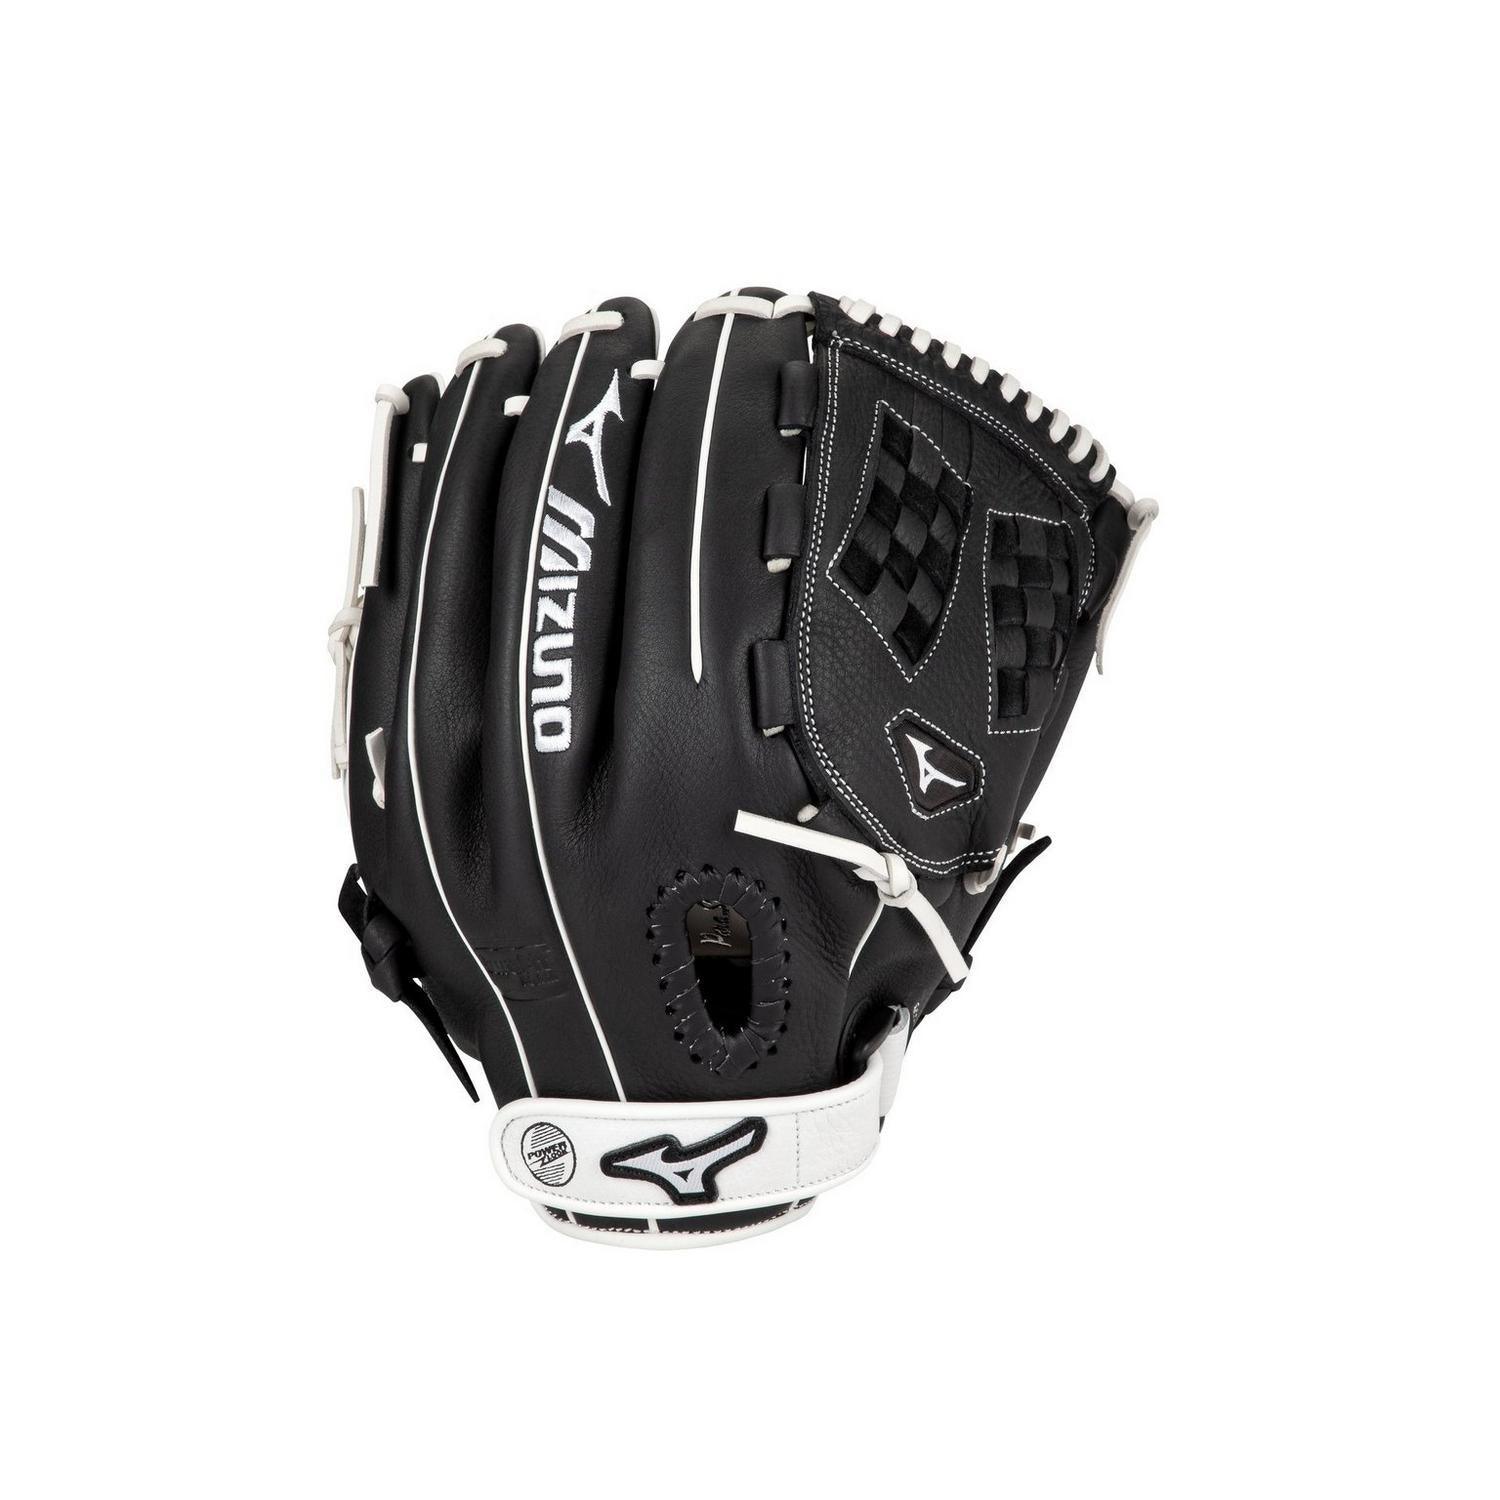 Franchise Series Fastpitch Softball Glove 12" - Sports Excellence